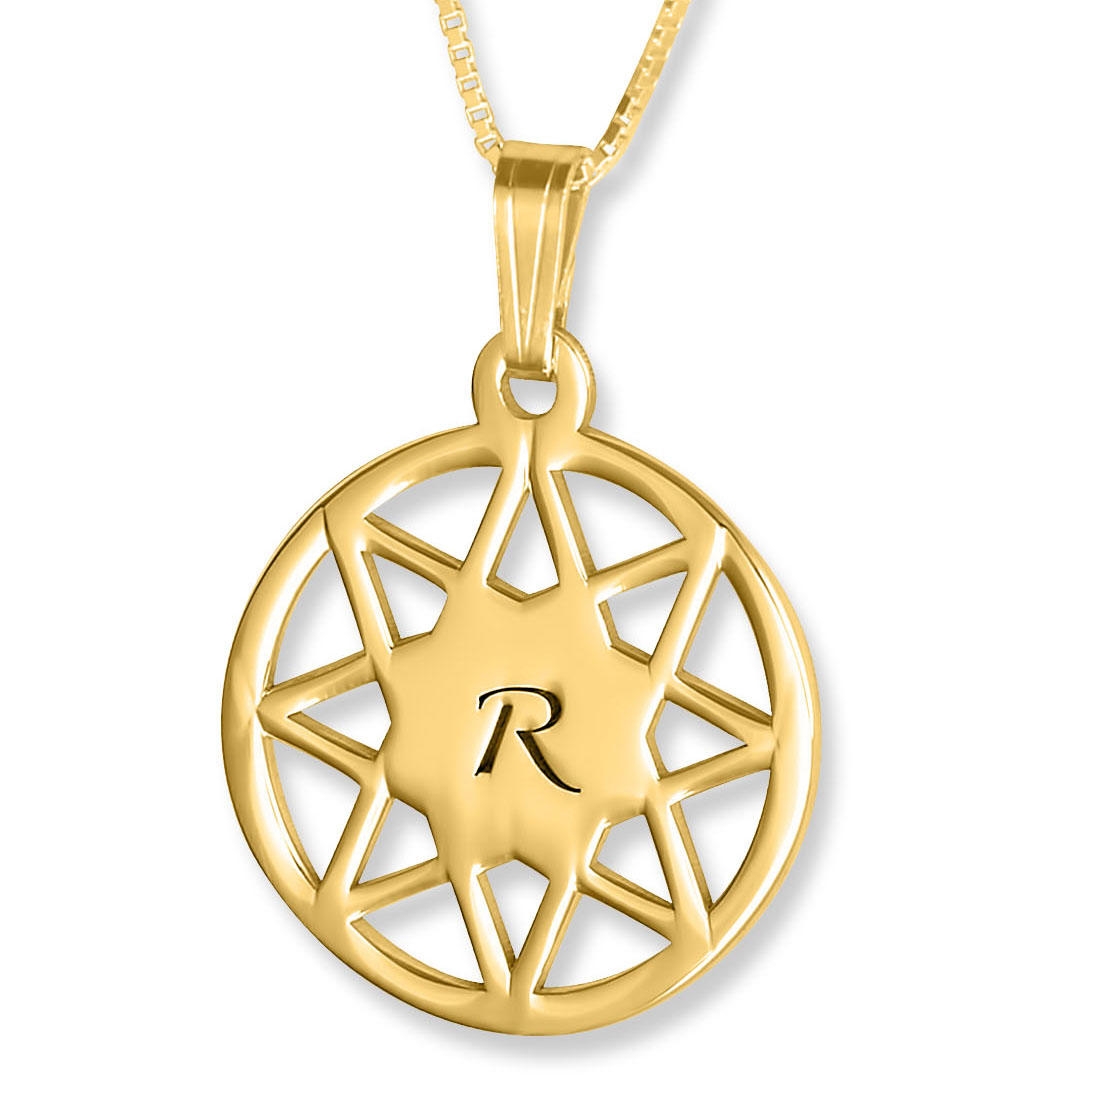 8 Point Star Engraved Initial Pendant, 24k Gold Plated - 1